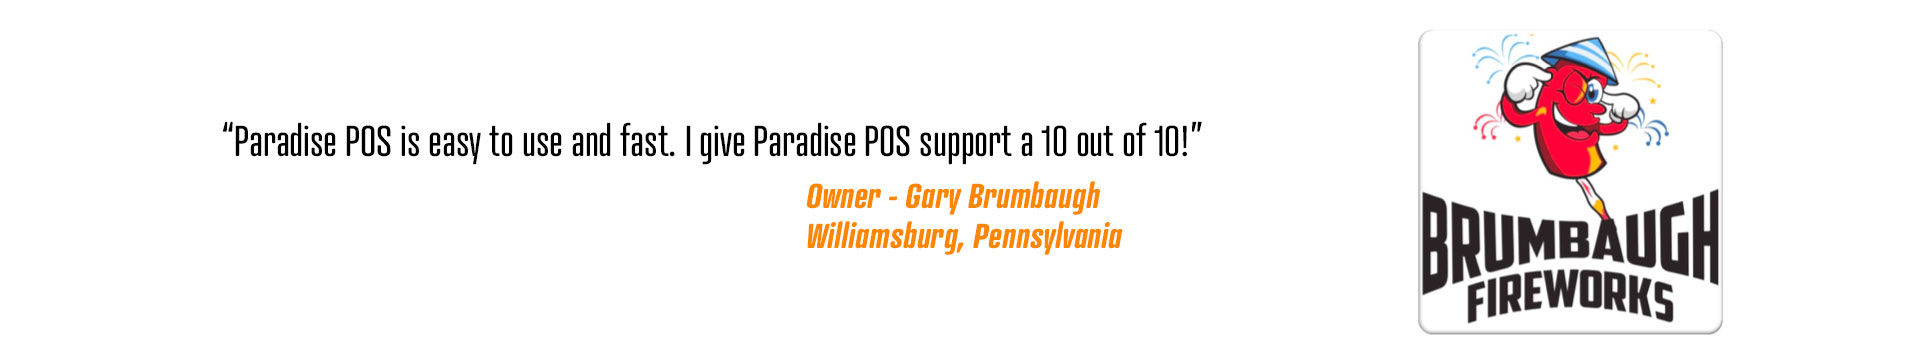 “Paradise POS is easy to use and fast. I give Paradise POS support a 10 out of 10!”